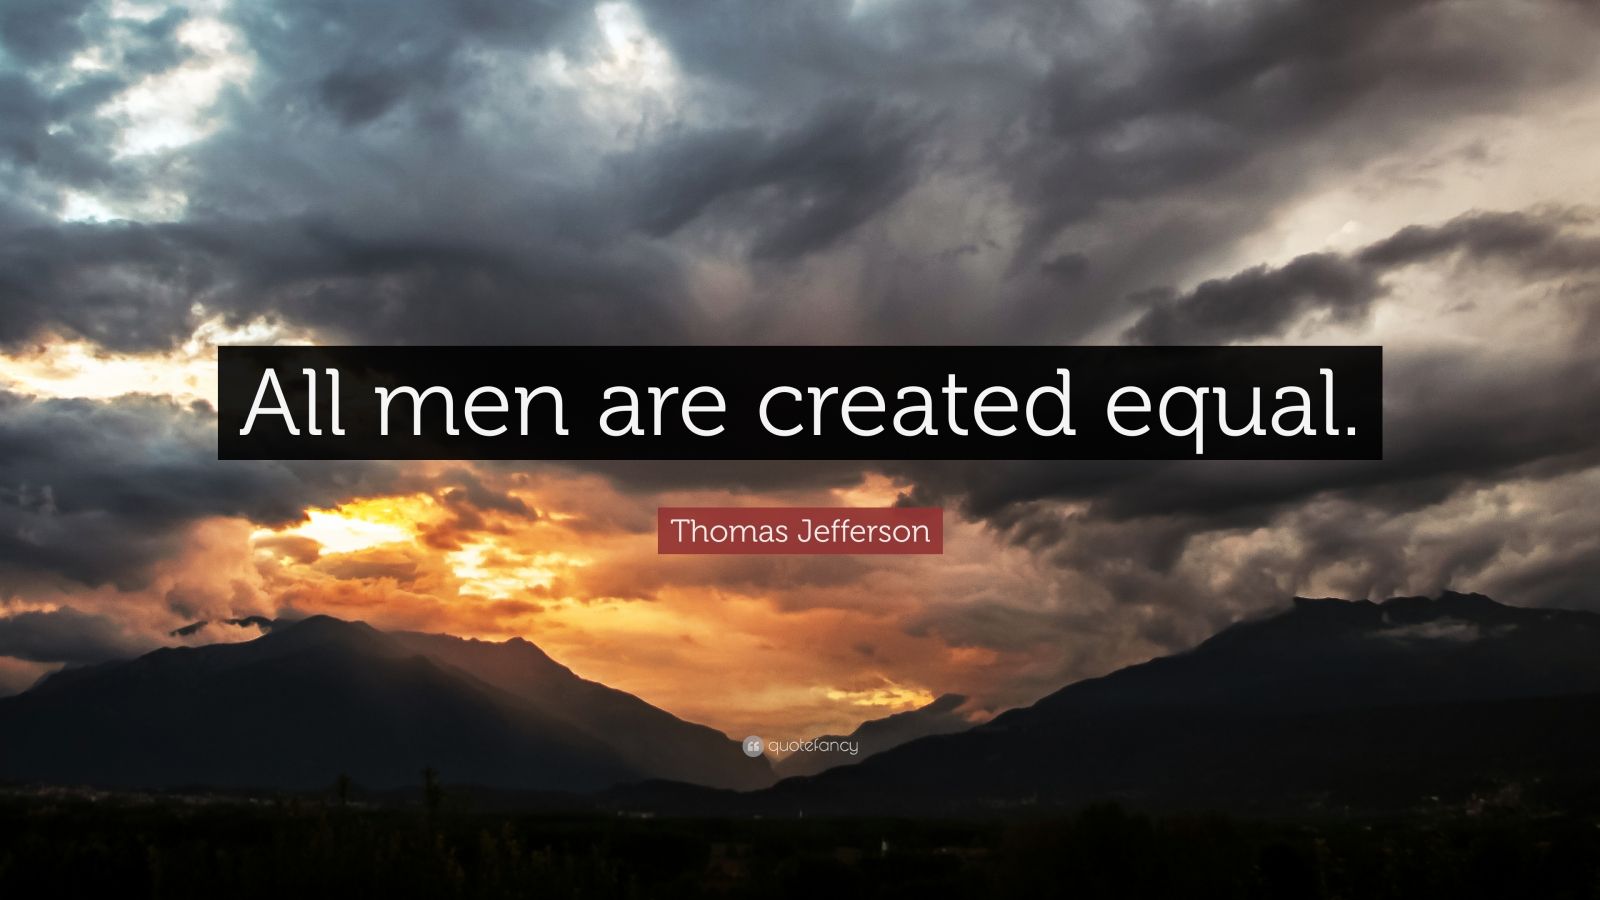 Thomas Jefferson Quote: “All men are created equal.” (10 wallpapers